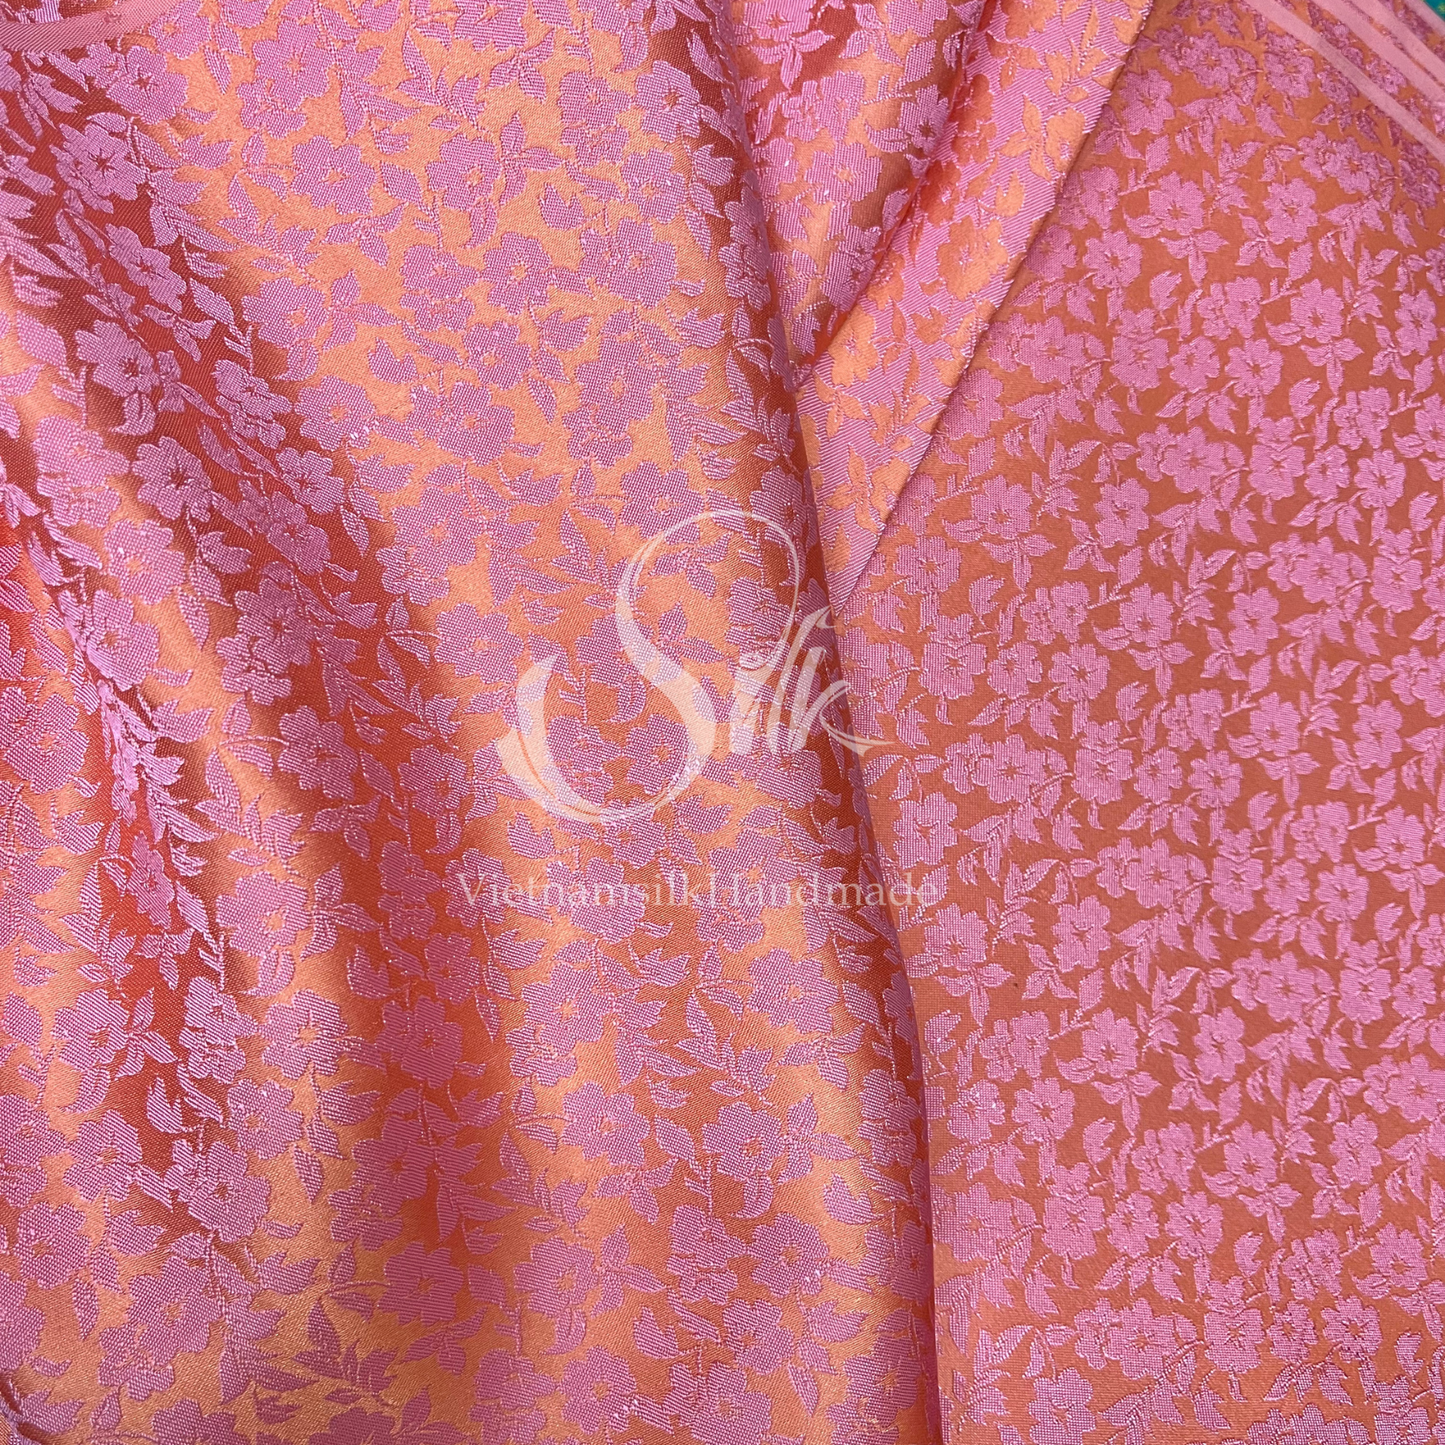 Pink Orange silk with Small Flowers - PURE MULBERRY SILK fabric by the yard - Luxury Silk - Natural silk - Handmade in VietNam- Silk with Design